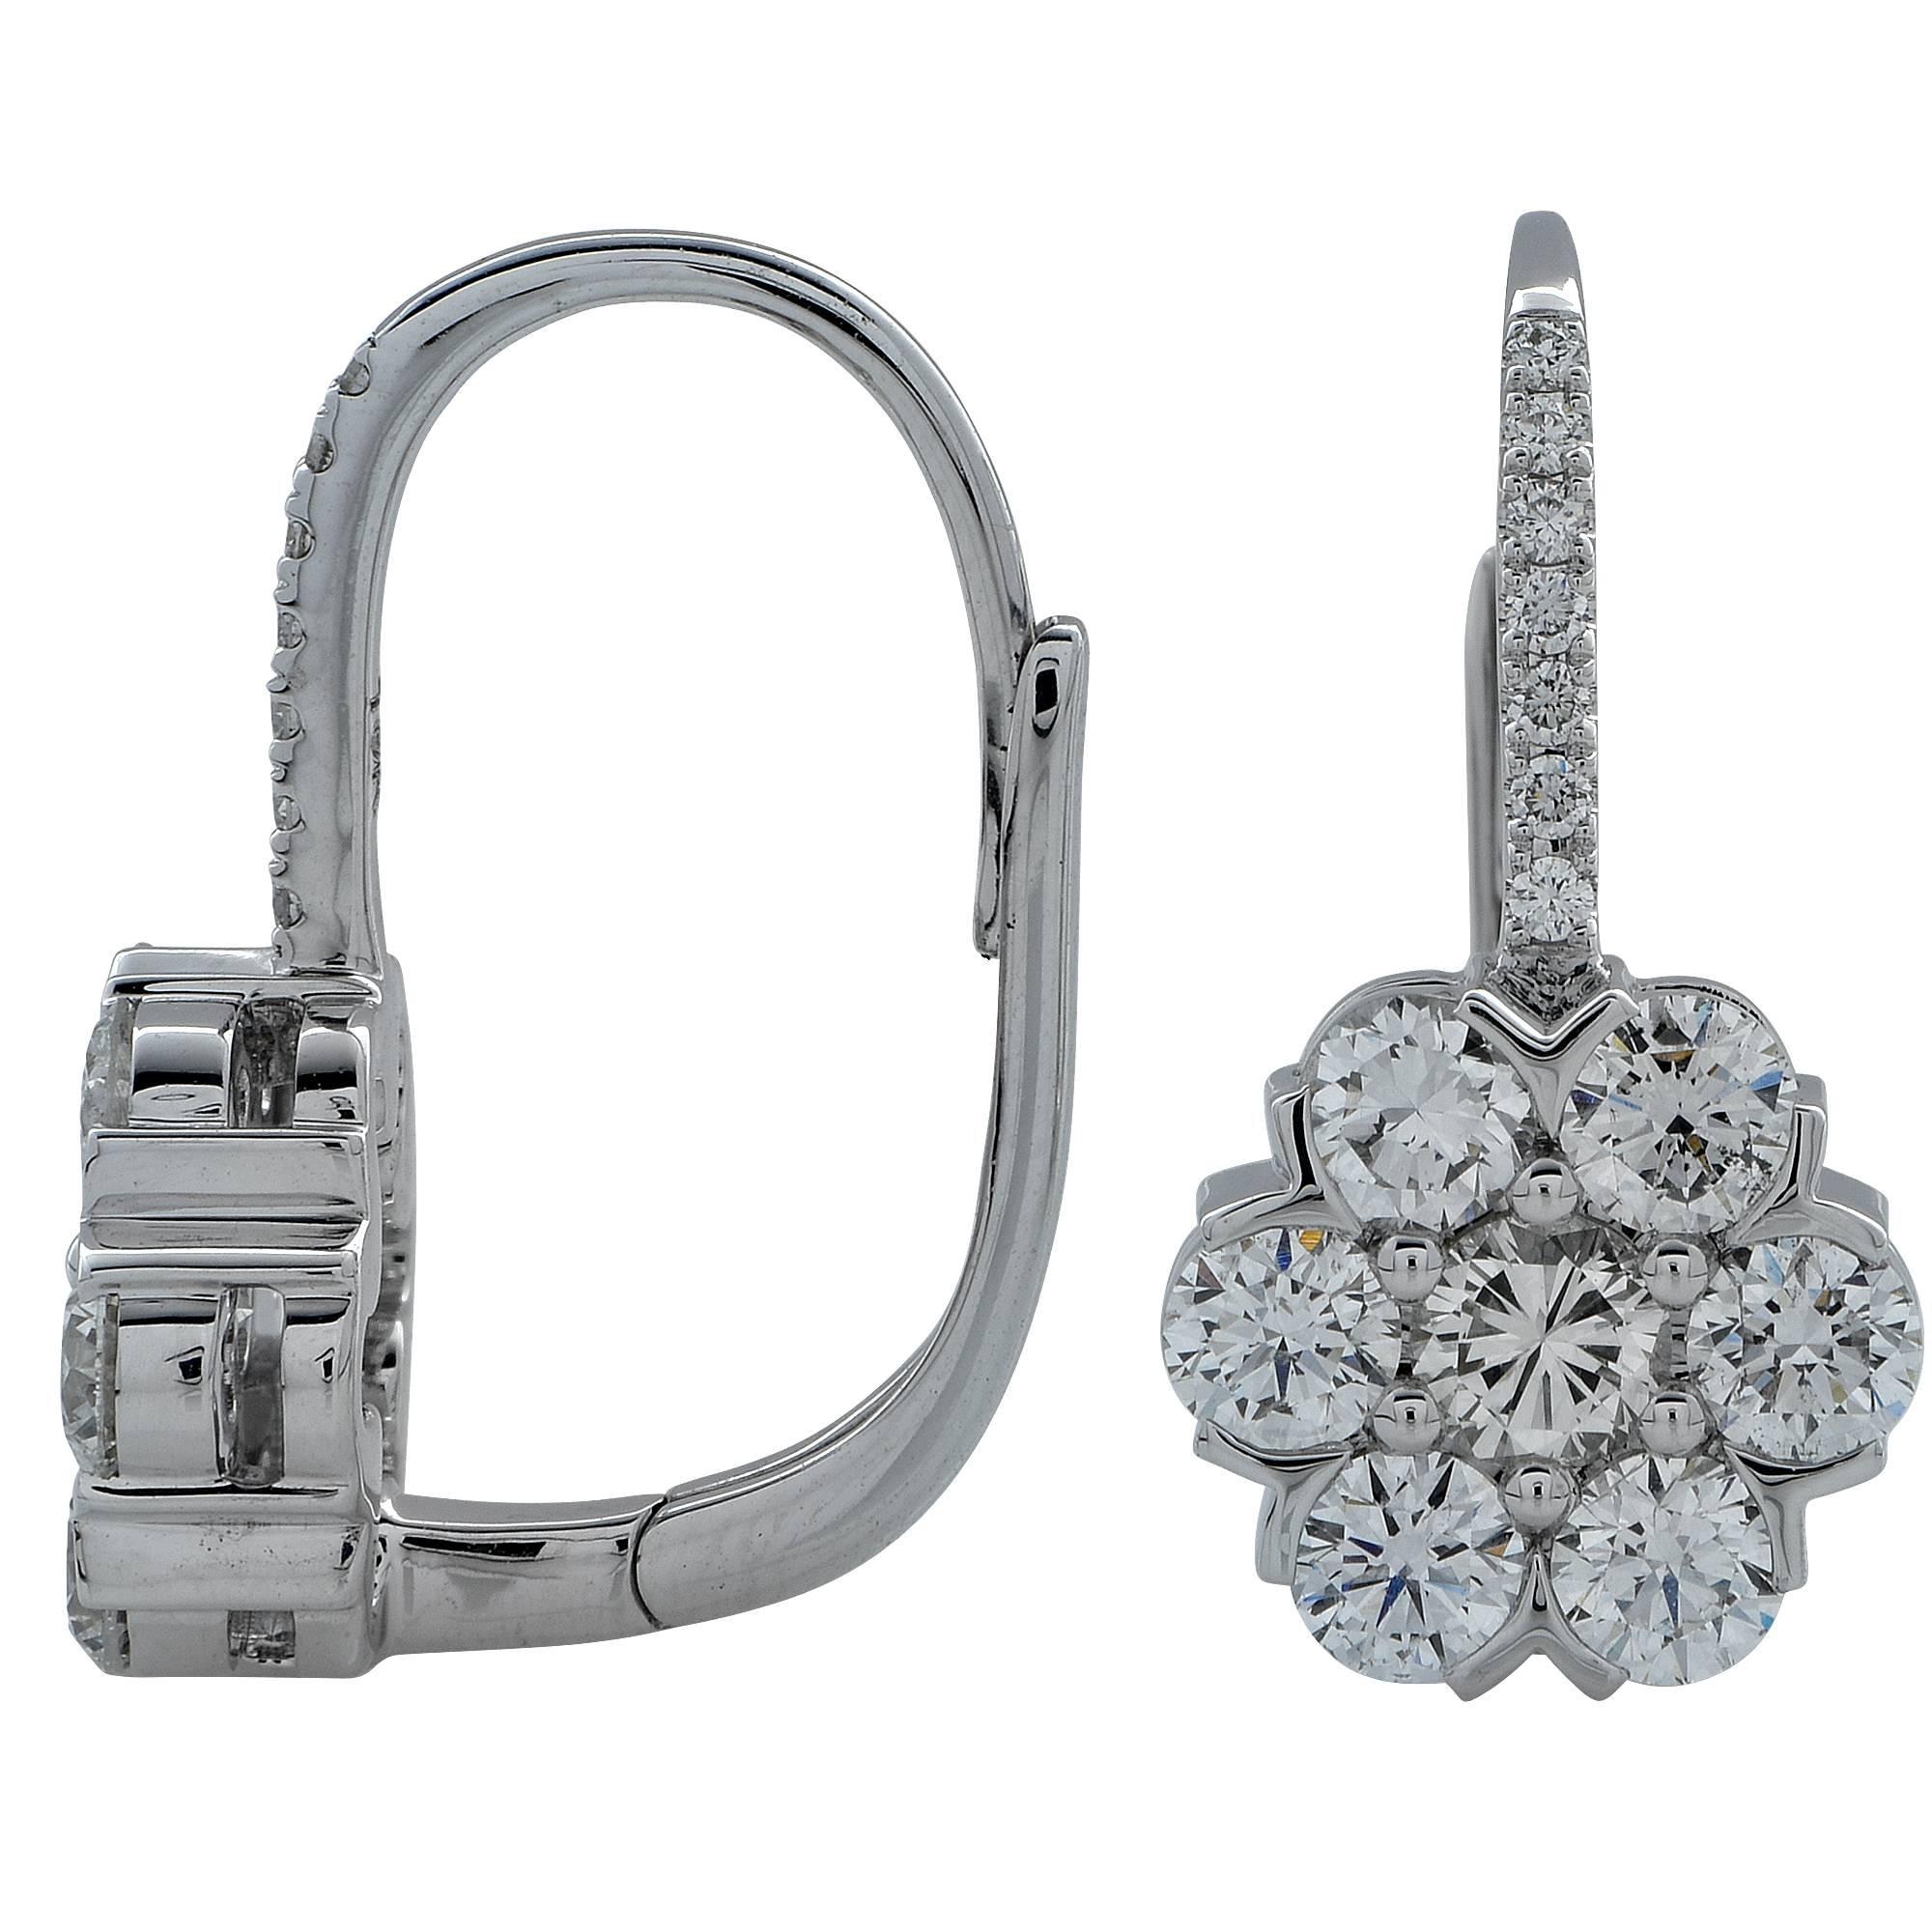 18k white gold earrings containing 14 round brilliant cut diamonds weighing 1.85ct F color and VS-SI clarity set in a cluster style suspended for white gold diamond encrusted wire containing 14 round brilliant cut diamonds weighing .10cts. These